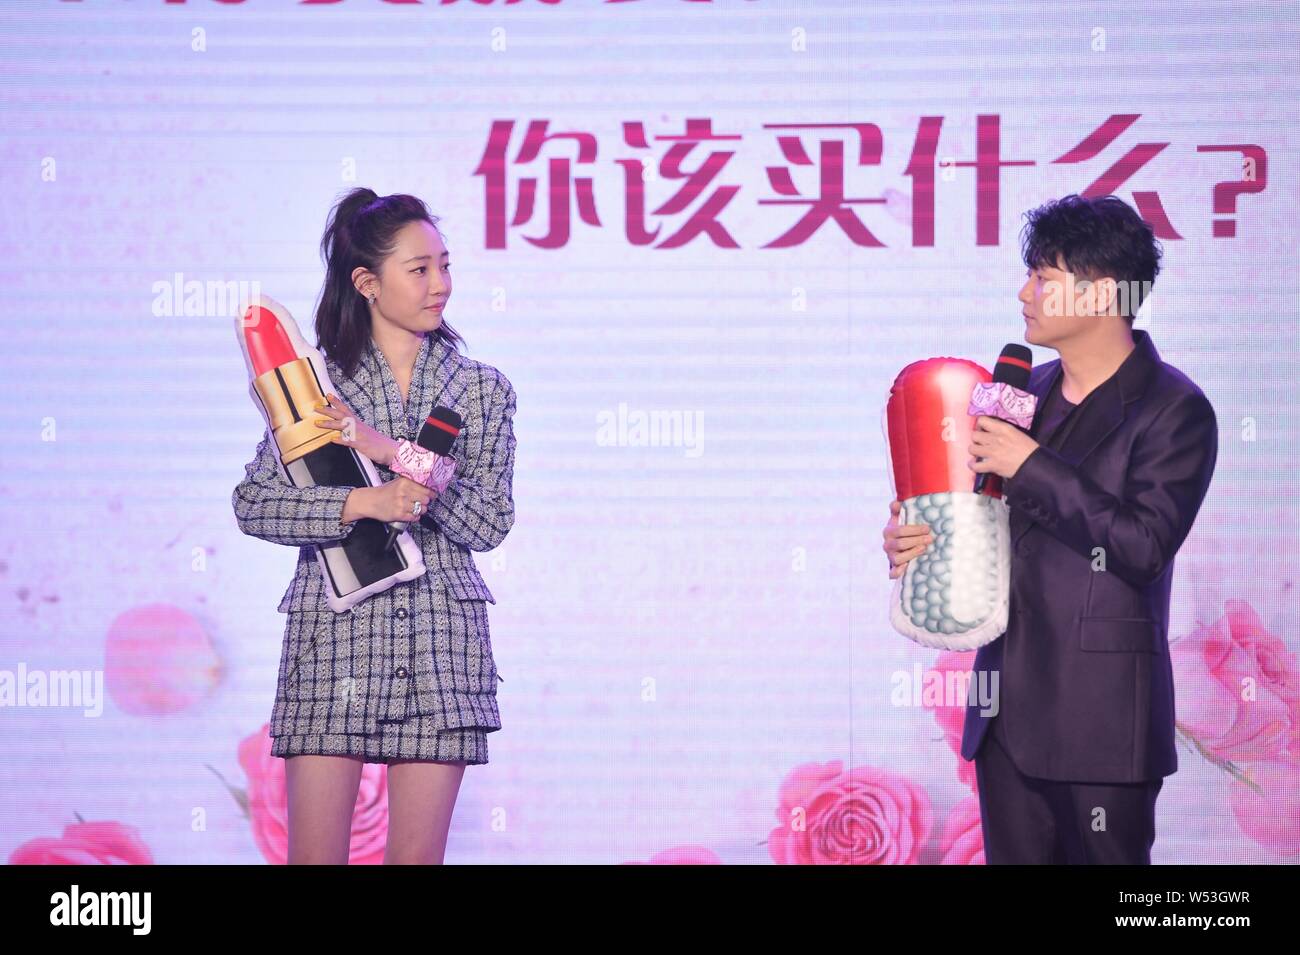 Chinese actress Bai Baihe and actor Xiao Yang attend a press conference for the movie "A Boyfriend For My Girlfriend" in Beijing, China, 10 January 20 Stock Photo